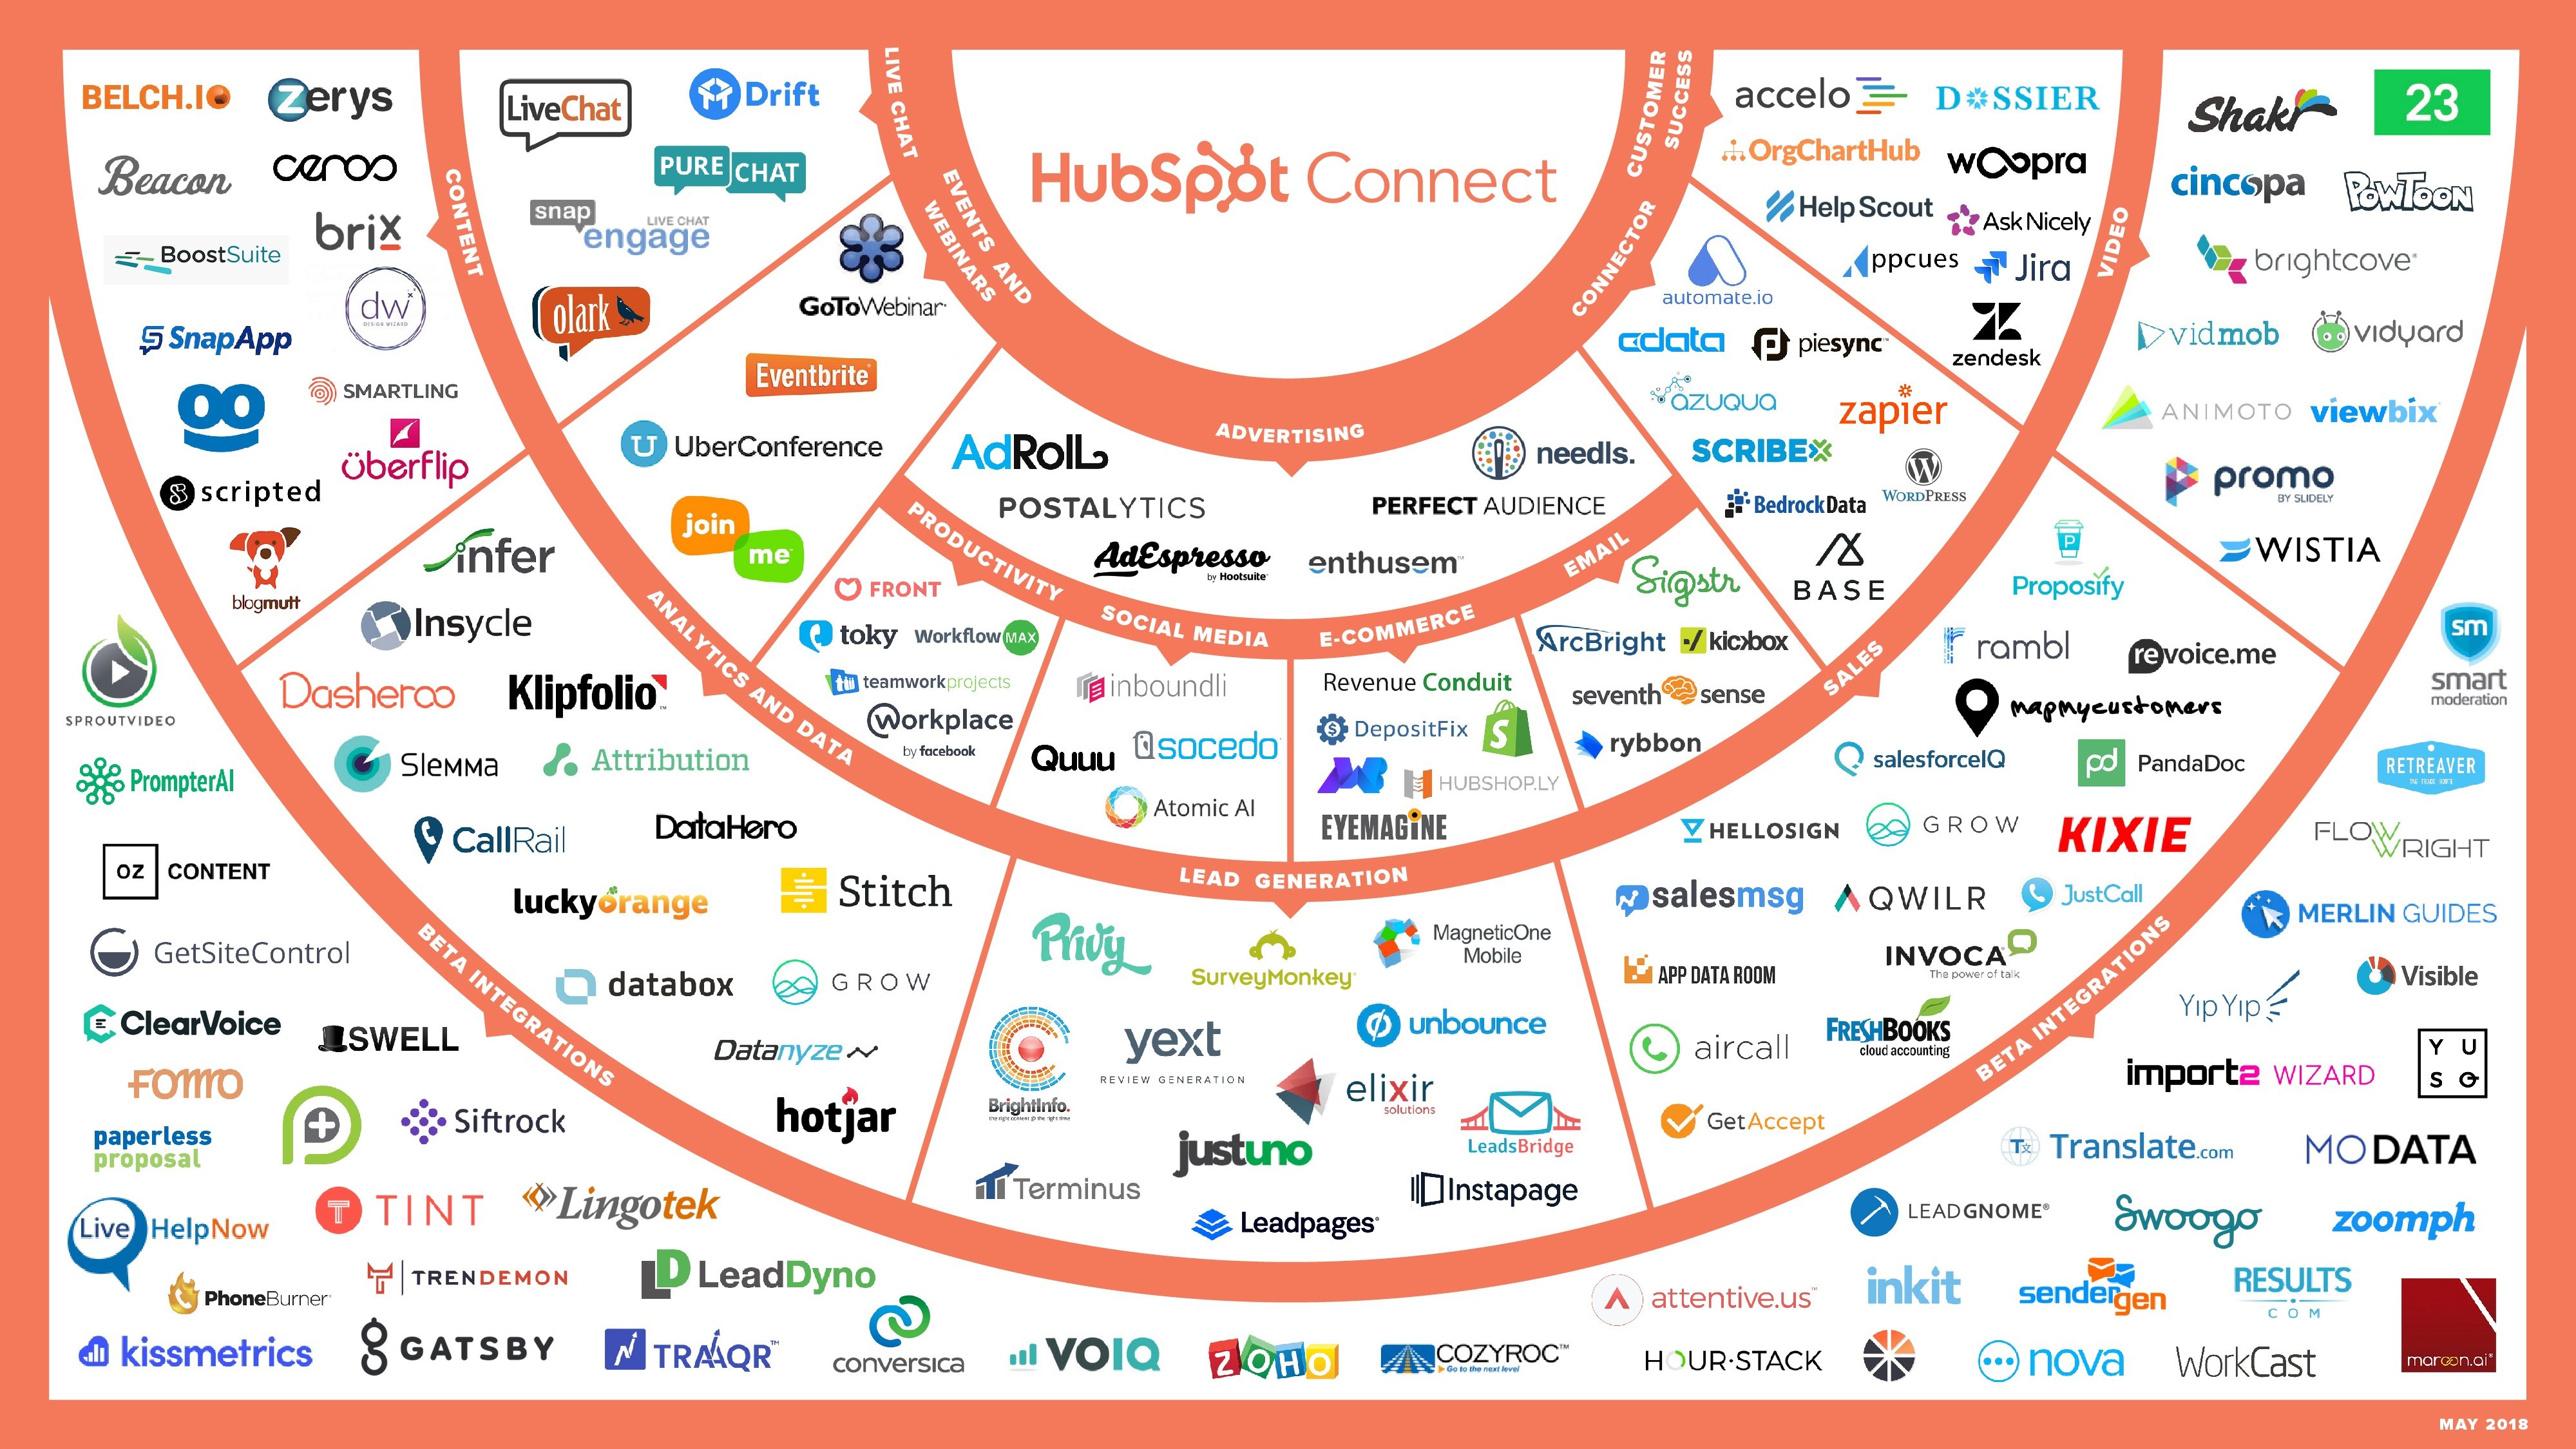 May 2018: New HubSpot Product Integrations This Month